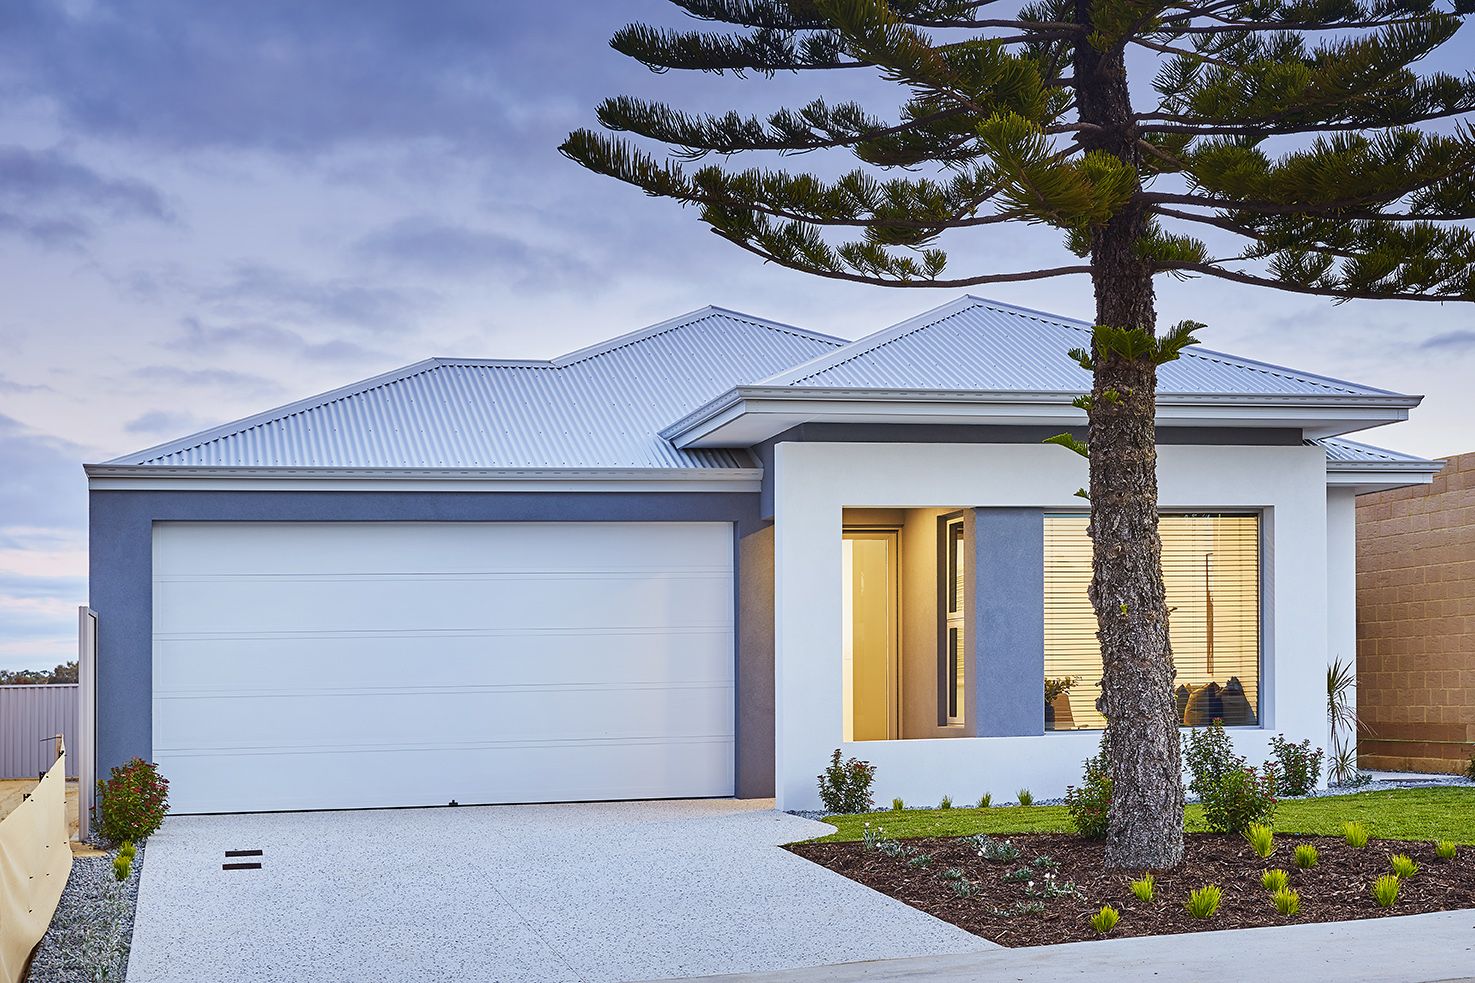 4 bedrooms New House & Land in Lot/471 Bluevale way YANCHEP WA, 6035